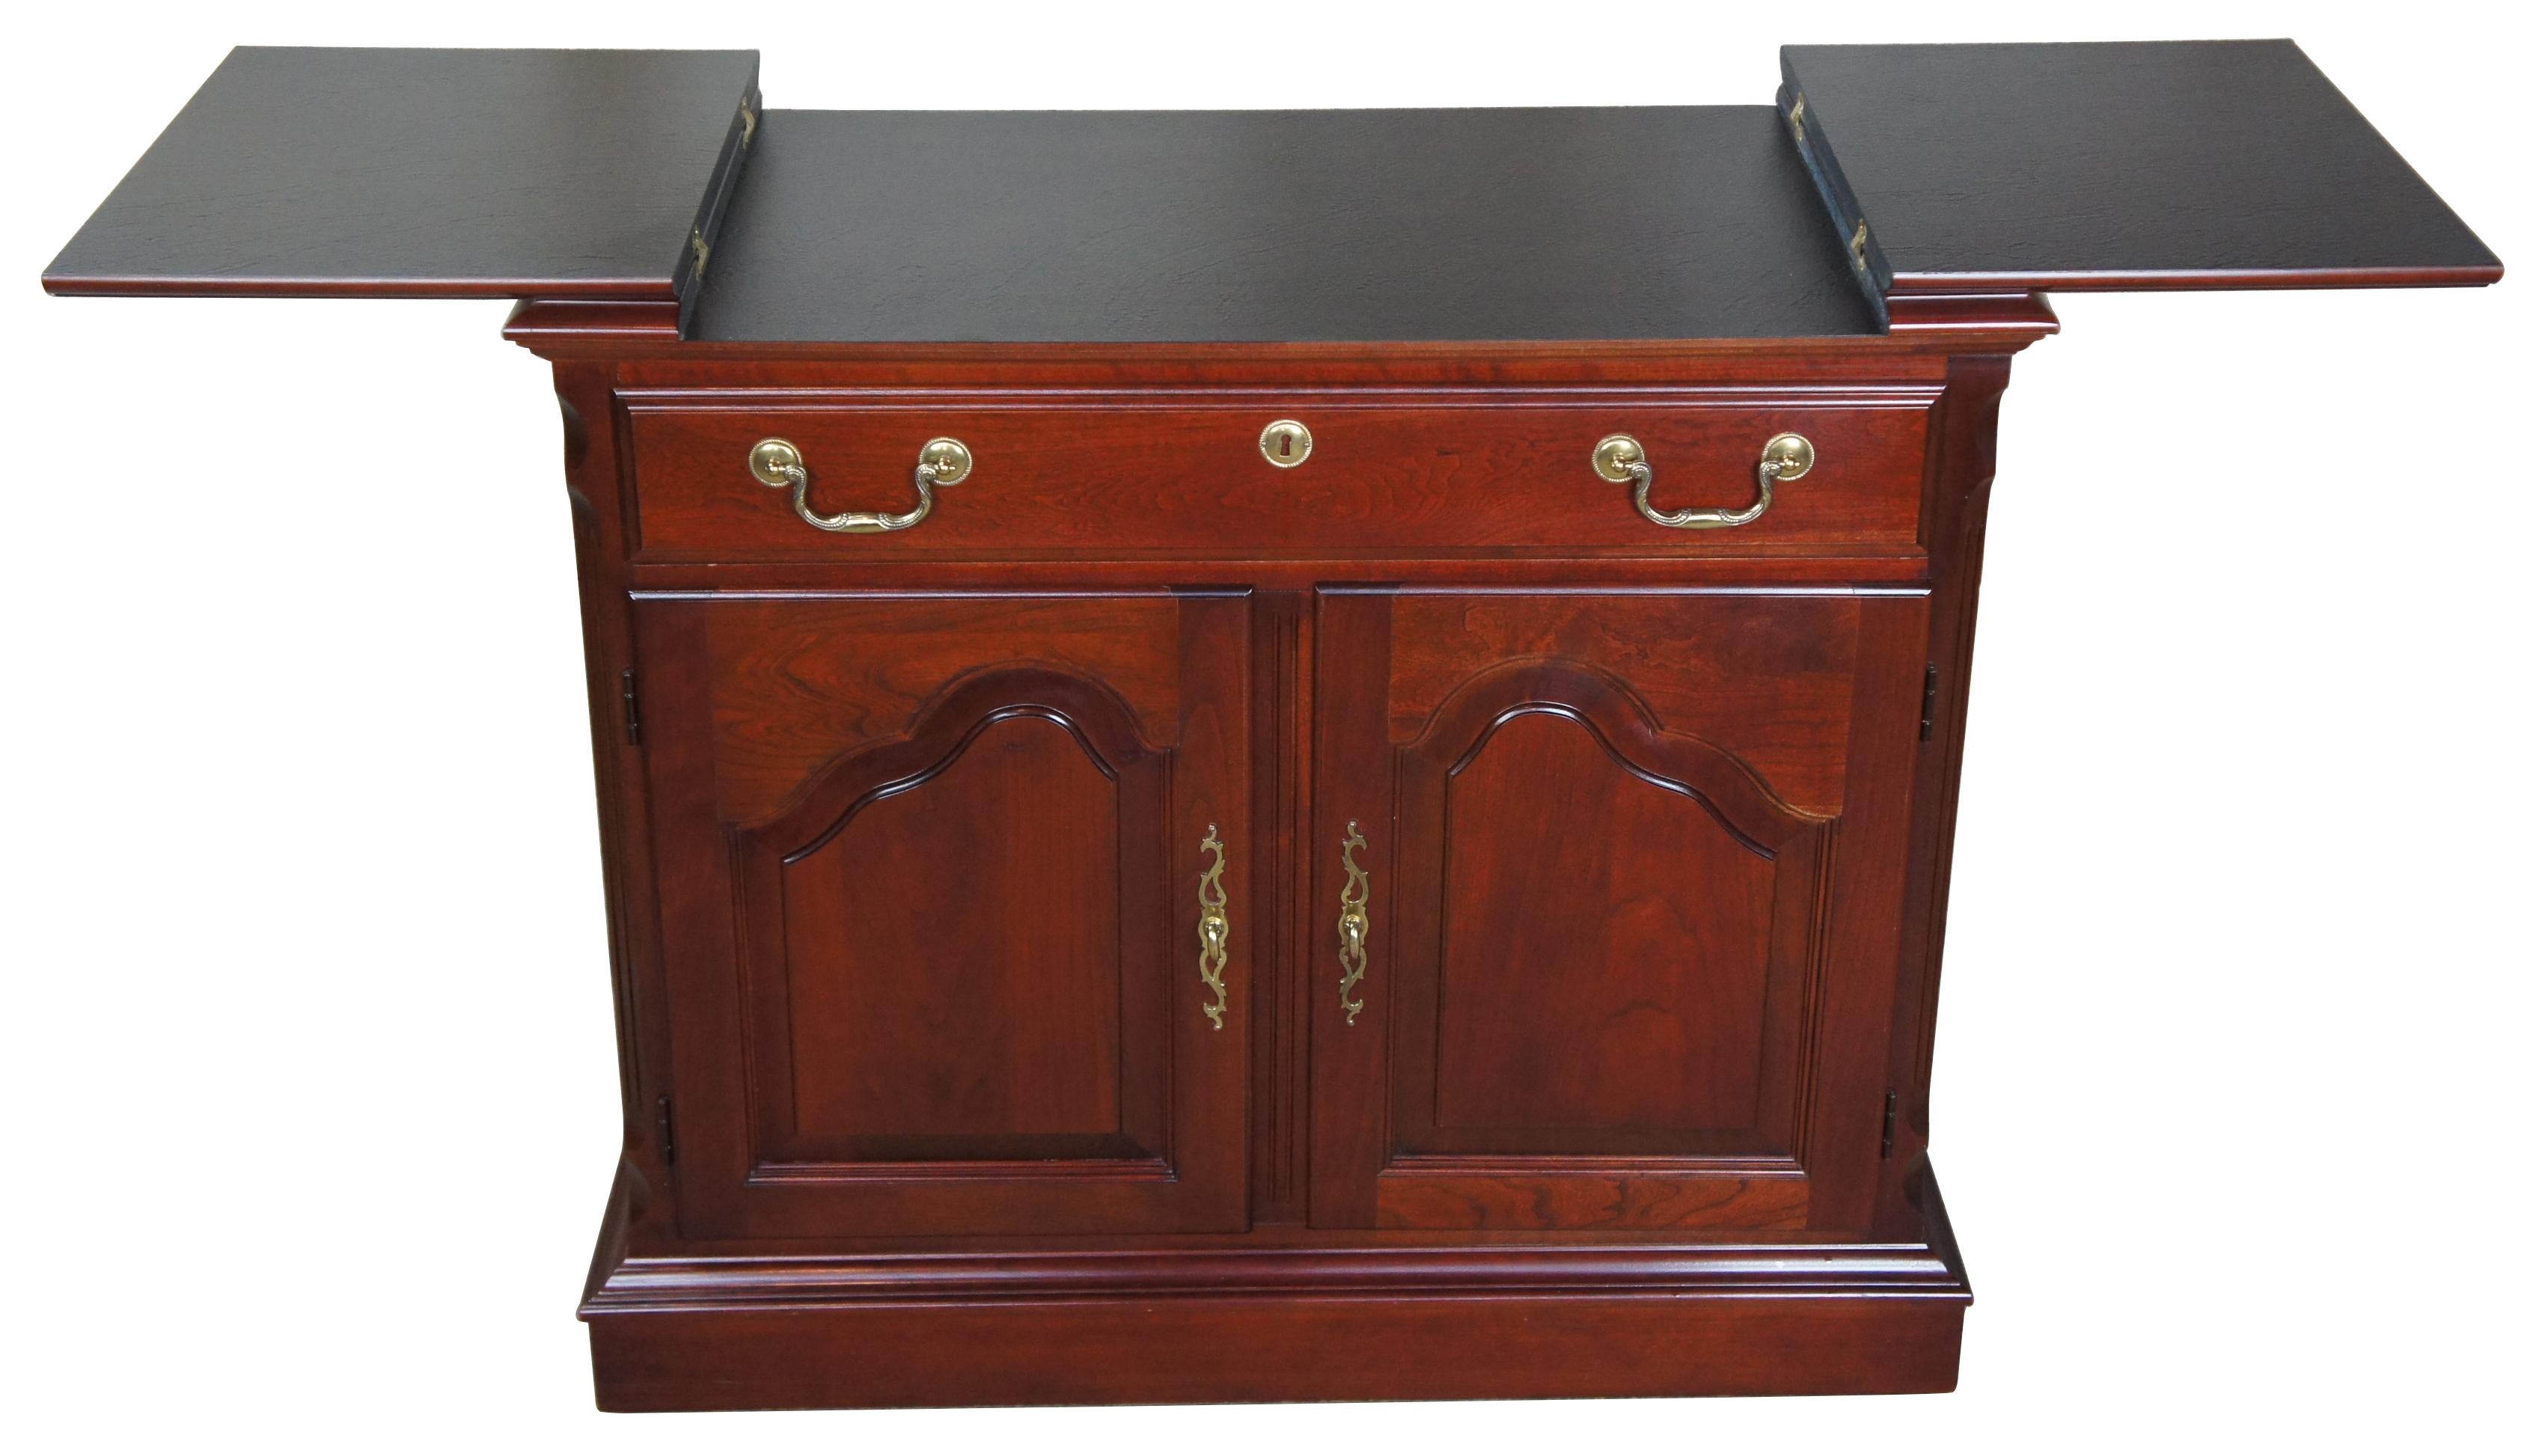 Vintage Pennsylvania House flip top cherry buffet, server or cabinet. Made of solid cherry construction with traditional styling, raised panel cabinet doors with dovetailed drawers, brass hardware, and drawer. The top opens to a formica surface,